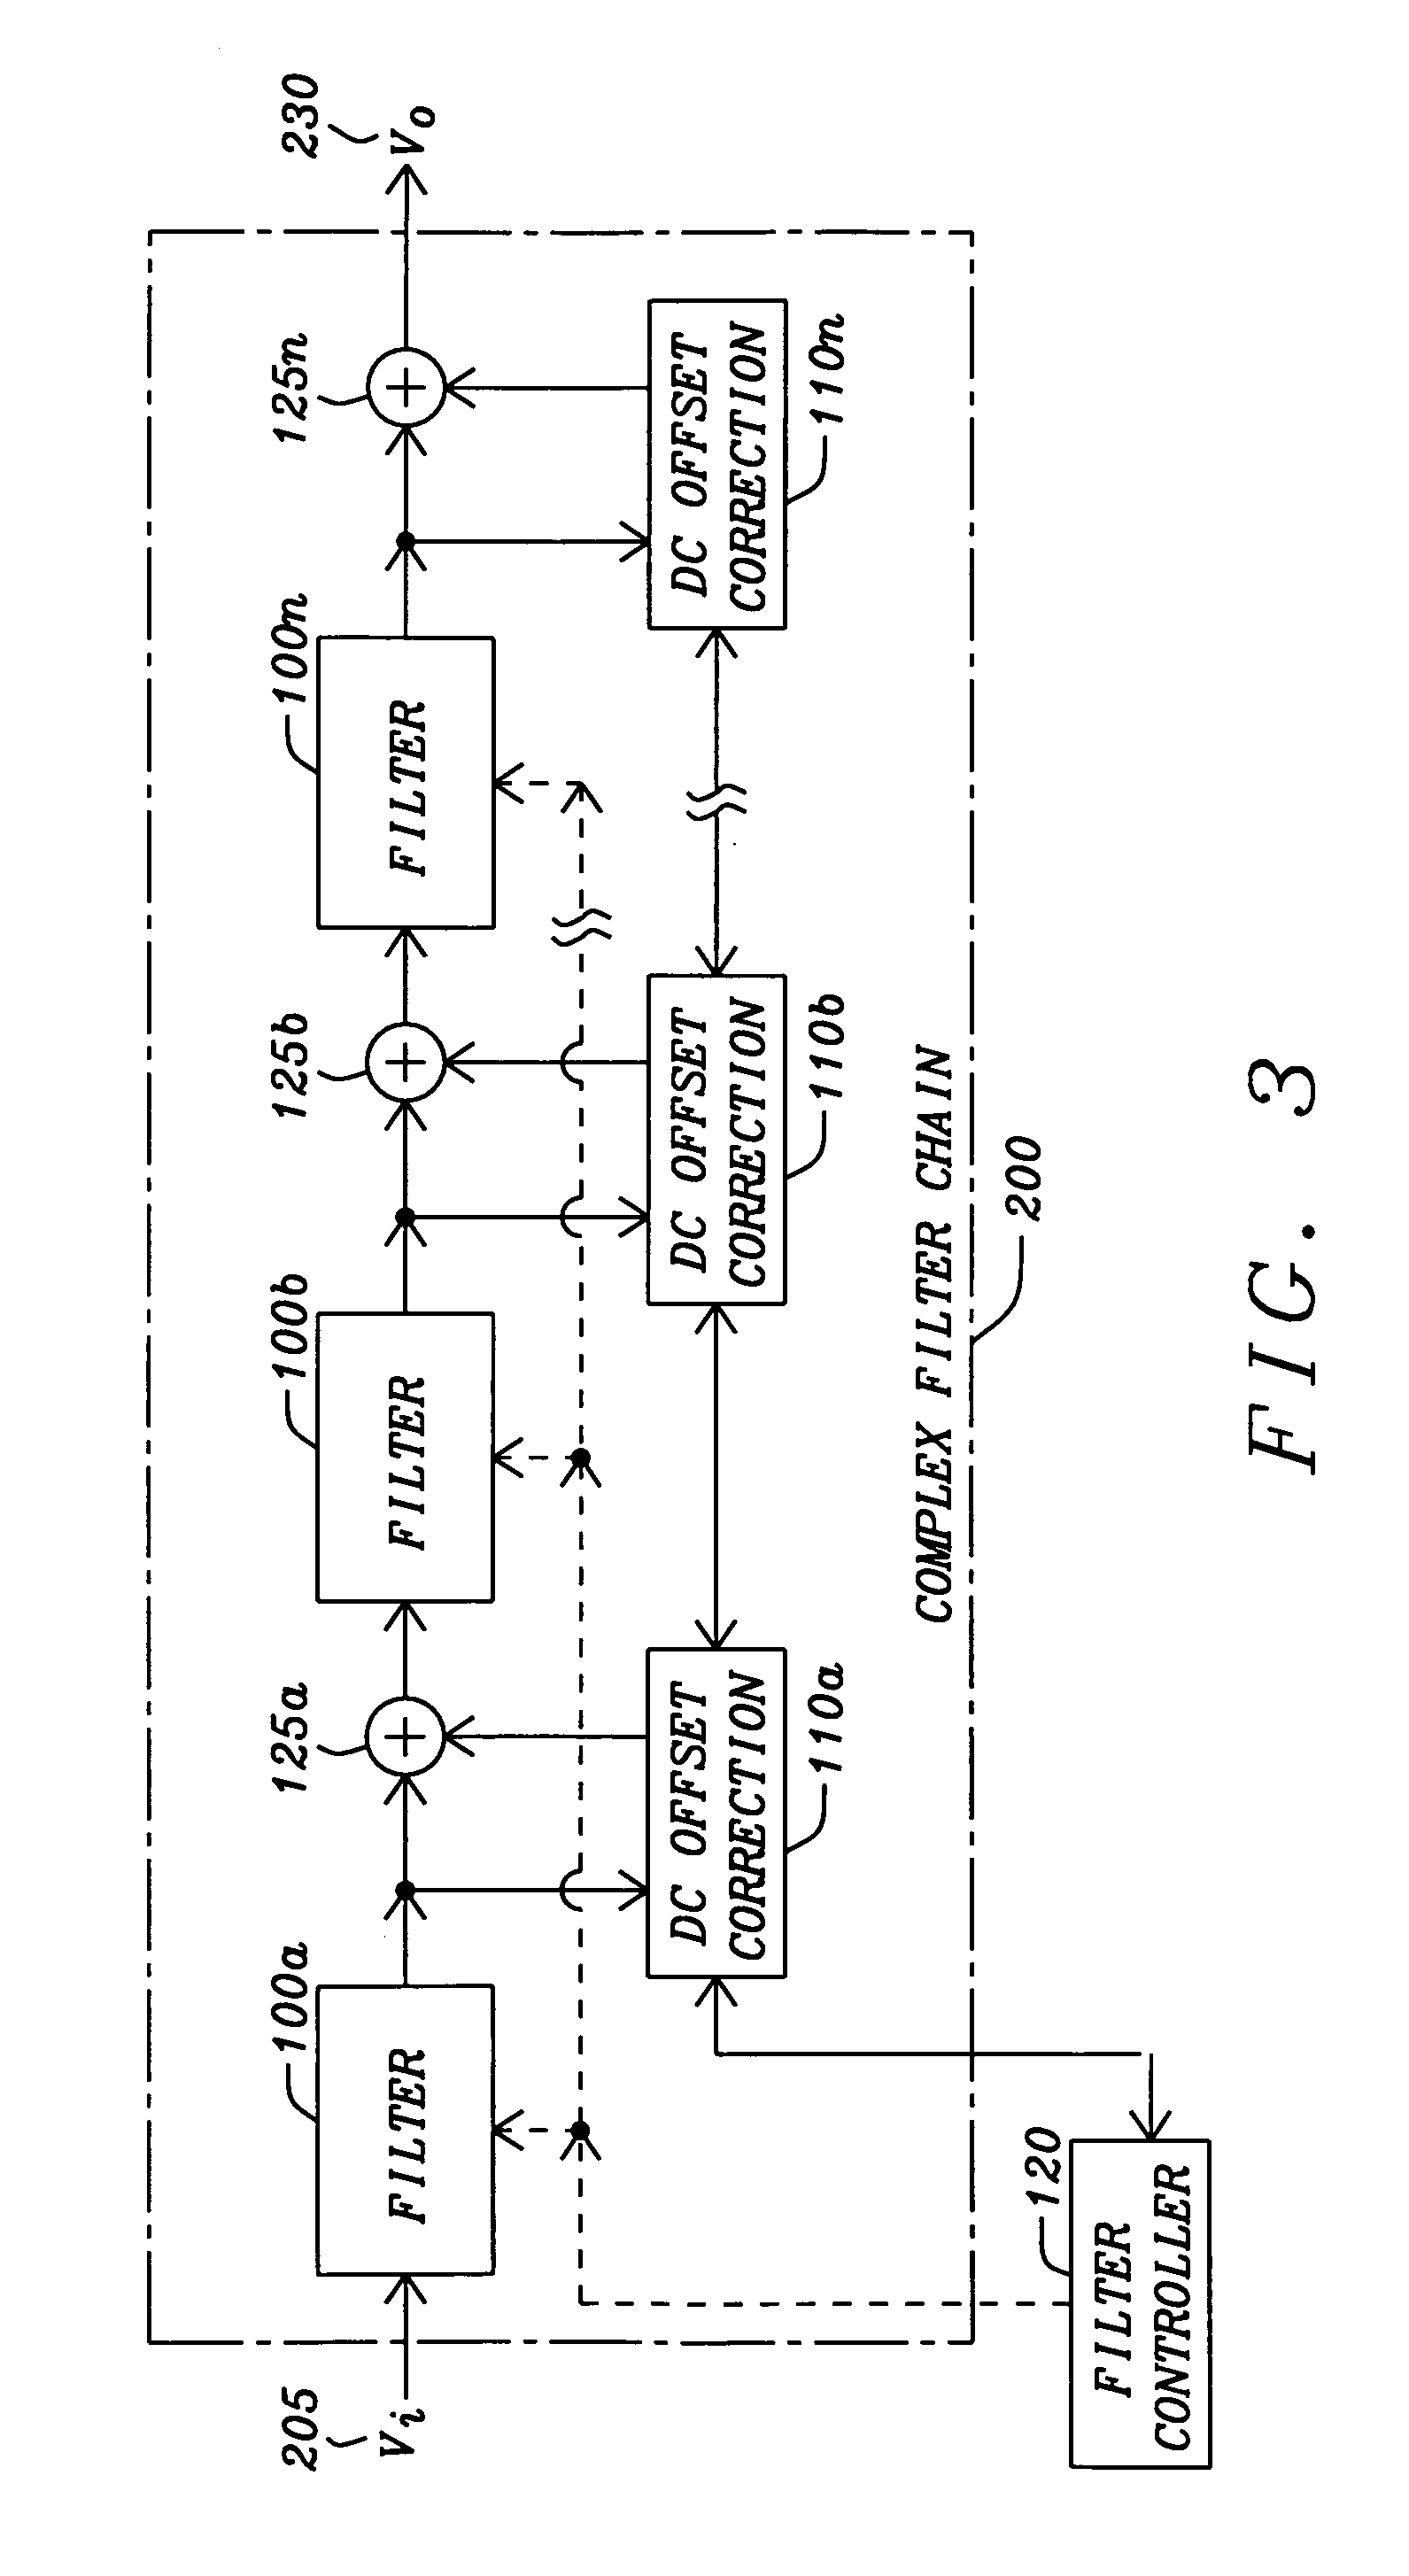 DC offset correction for high gain complex filter